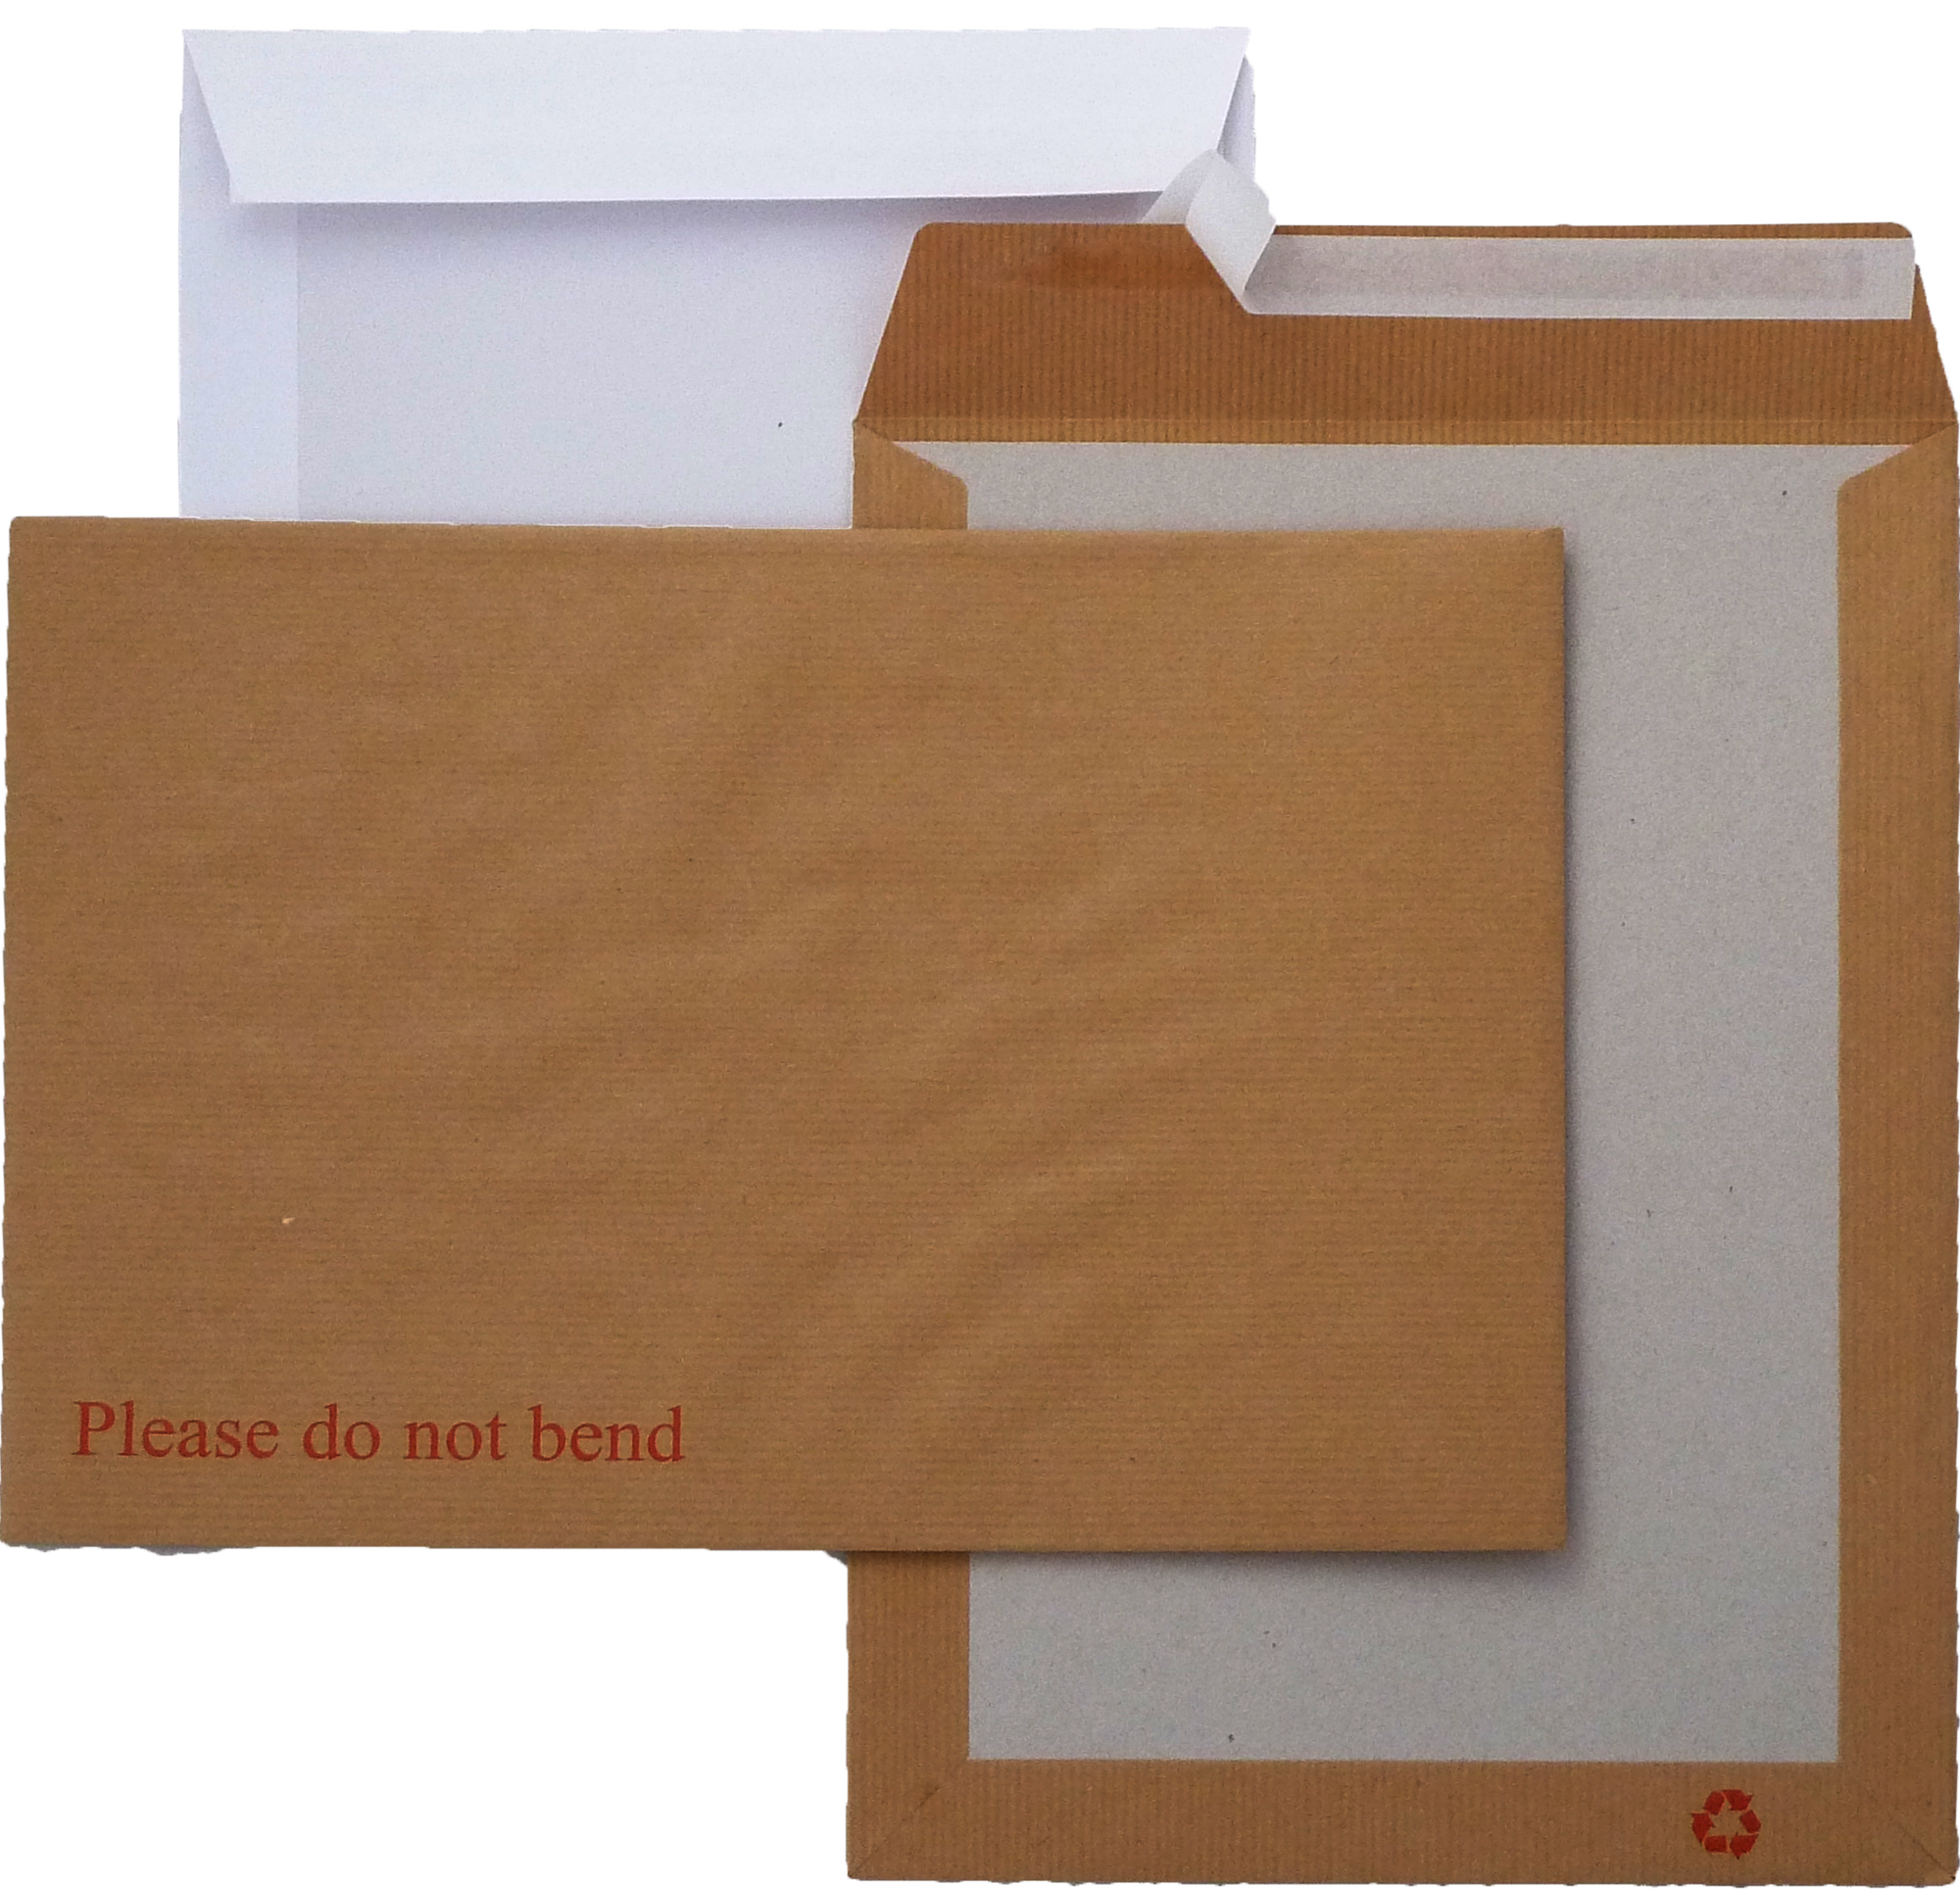 Sentinel - Board backed envelopes in every shape and colour